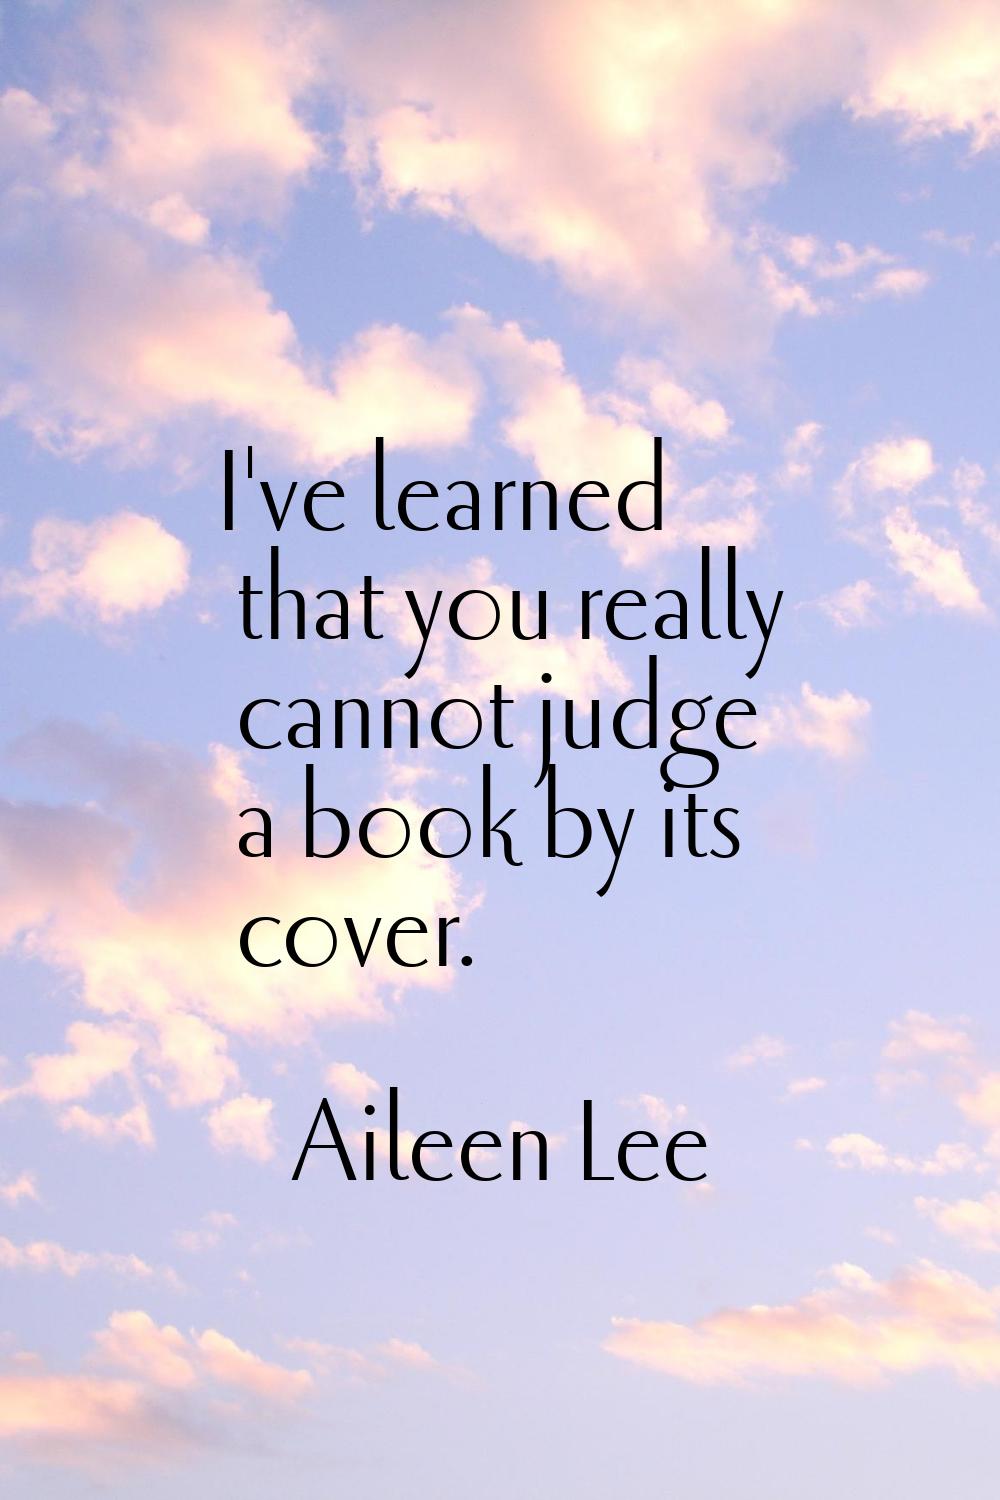 I've learned that you really cannot judge a book by its cover.